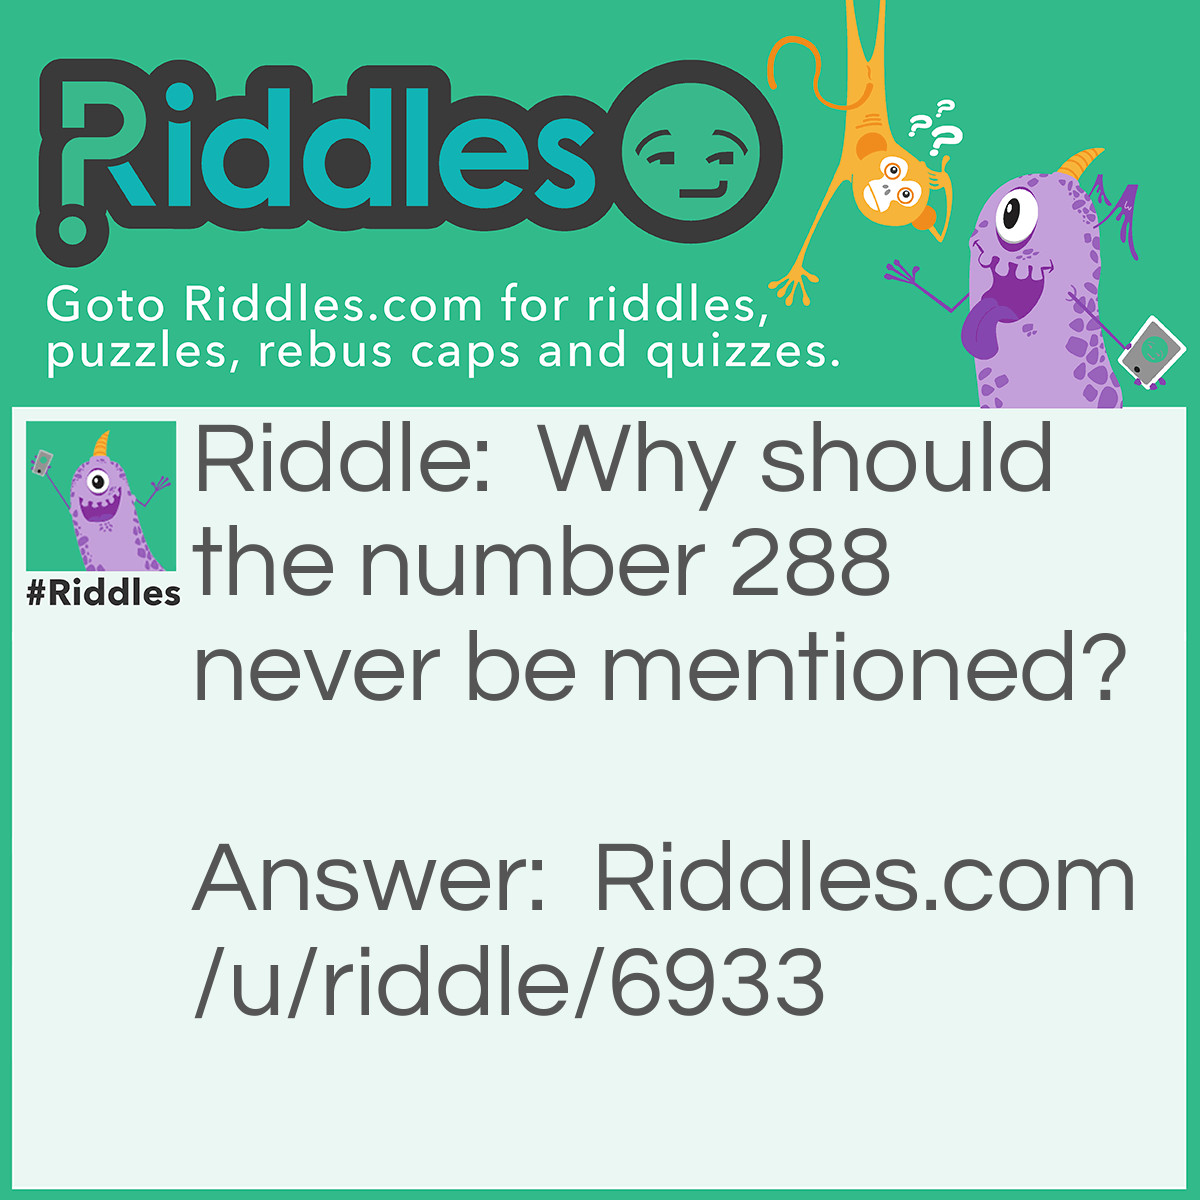 Riddle: Why should the number 288 never be mentioned? Answer: It's "two" gross!